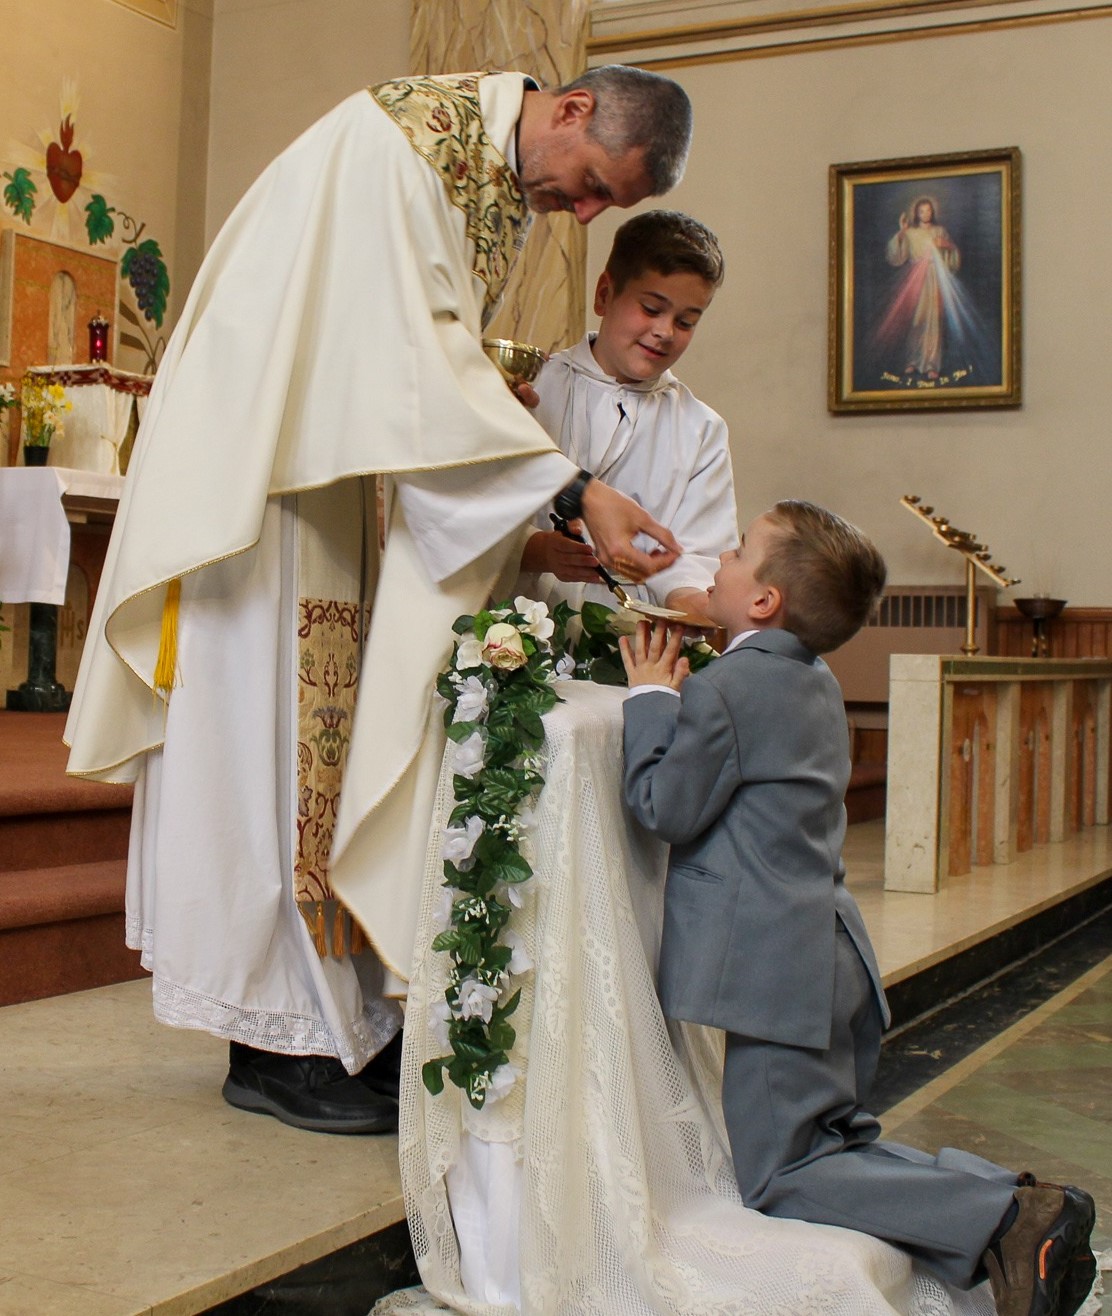 Fr. Silvio giving First Communion to a students kneeling looking up